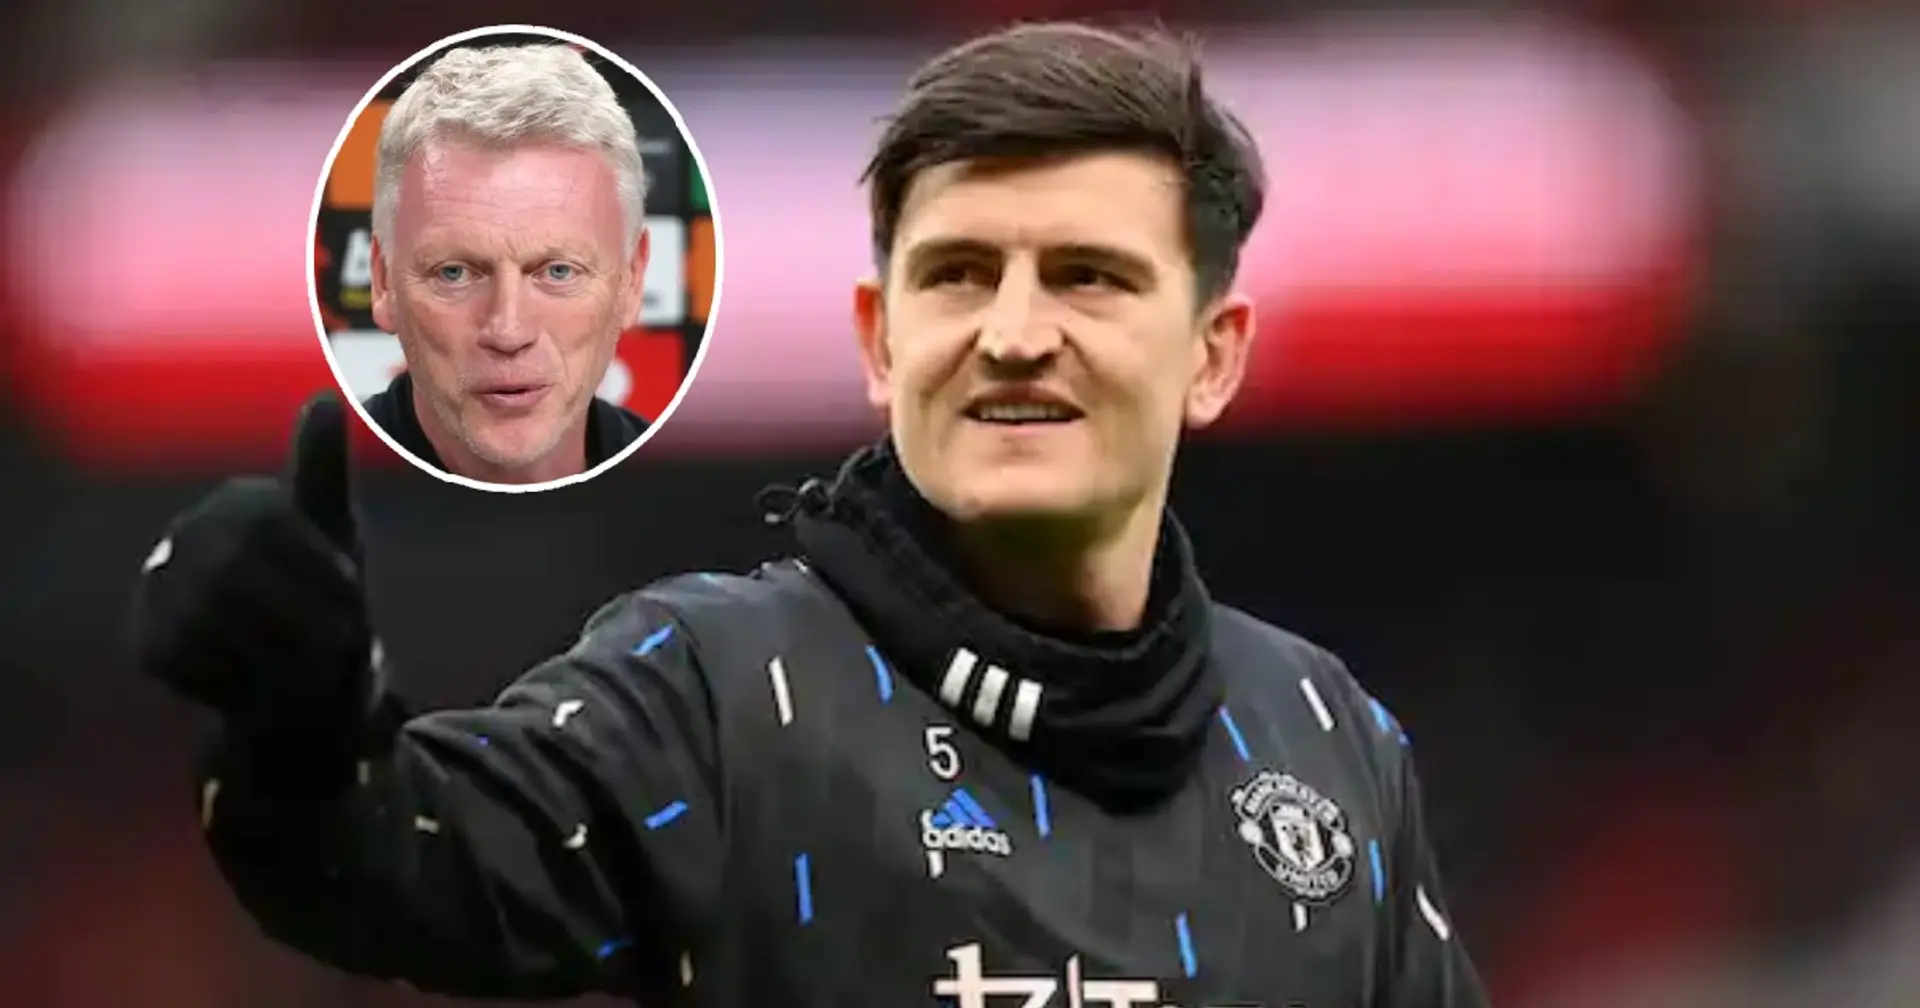 Harry Maguire's West Ham move imminent as David Moyes provides update